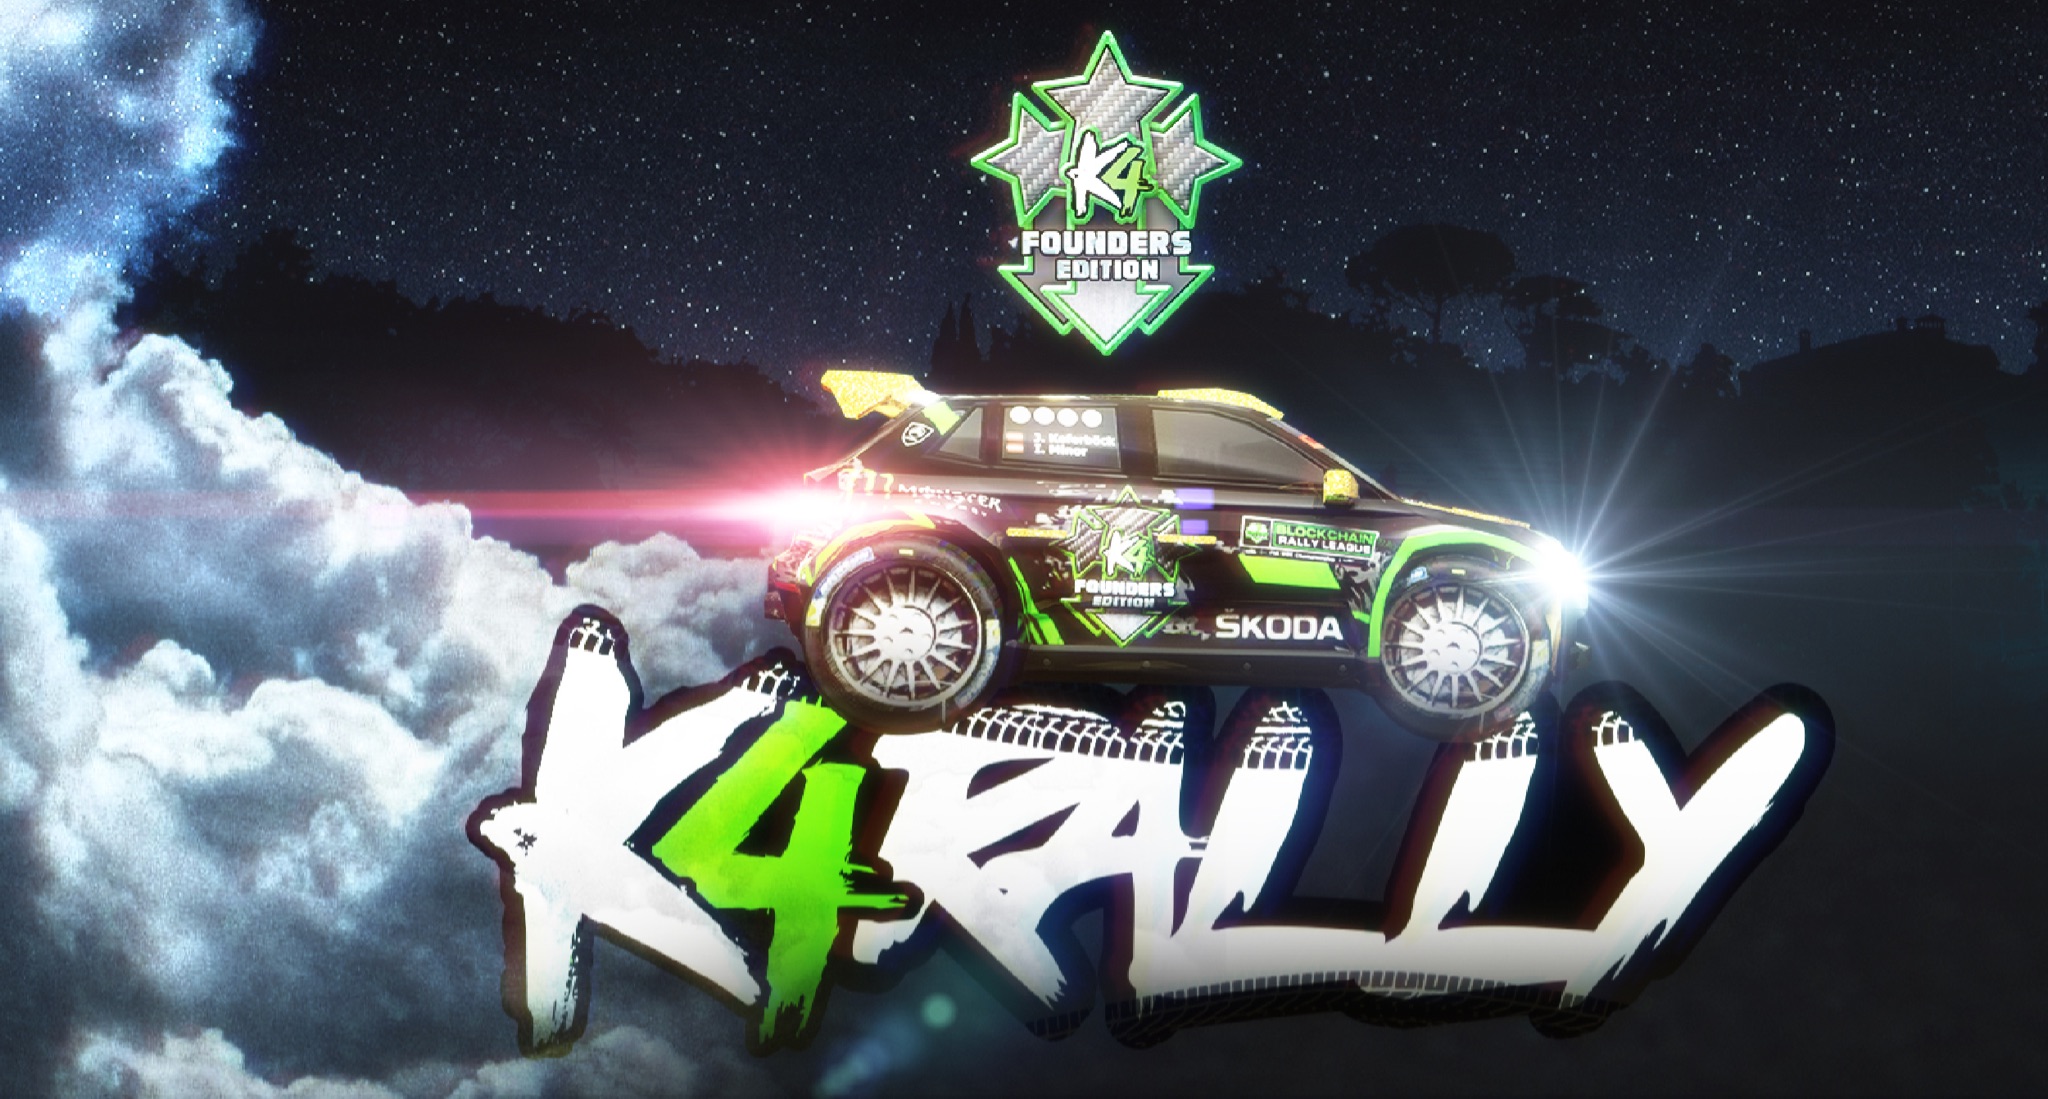 K4 Rally Goes Live With Founders Edition NFT Mint